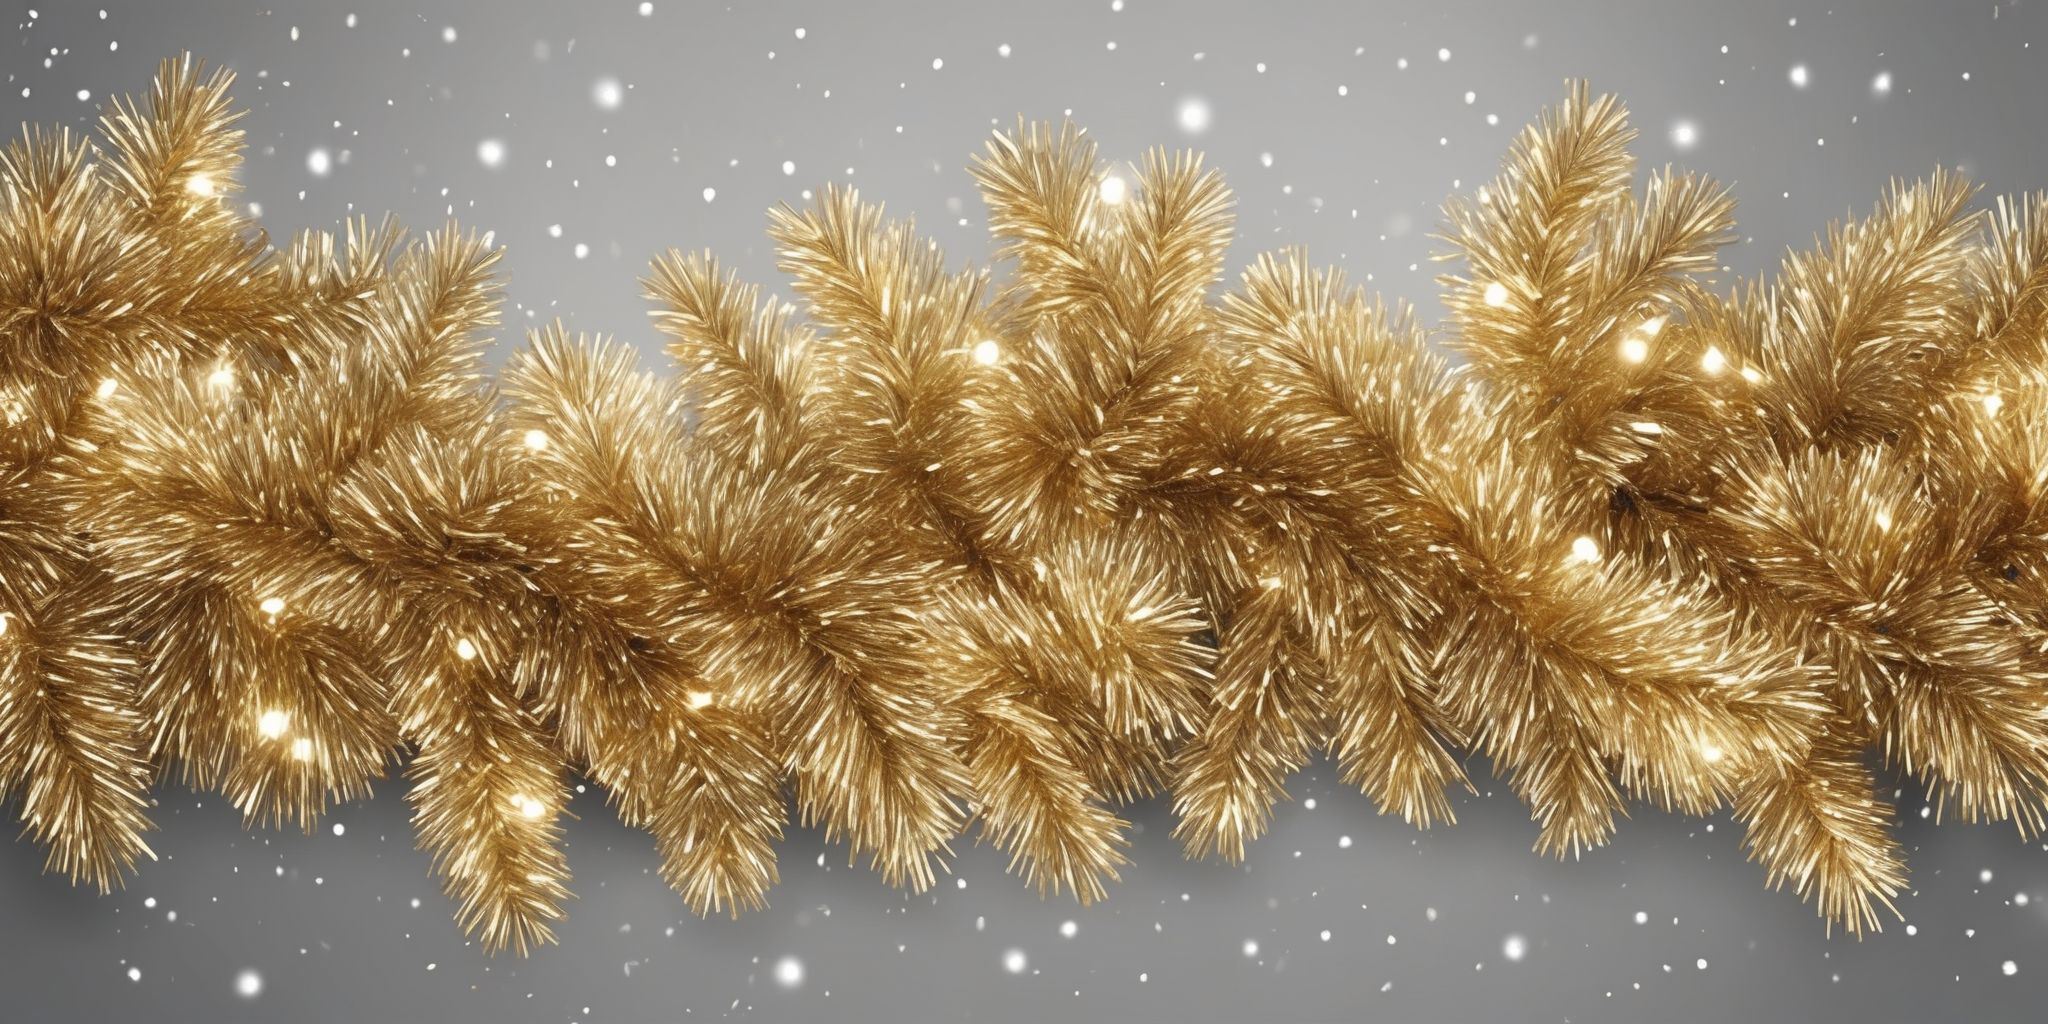 Tinsel Decor in realistic Christmas style